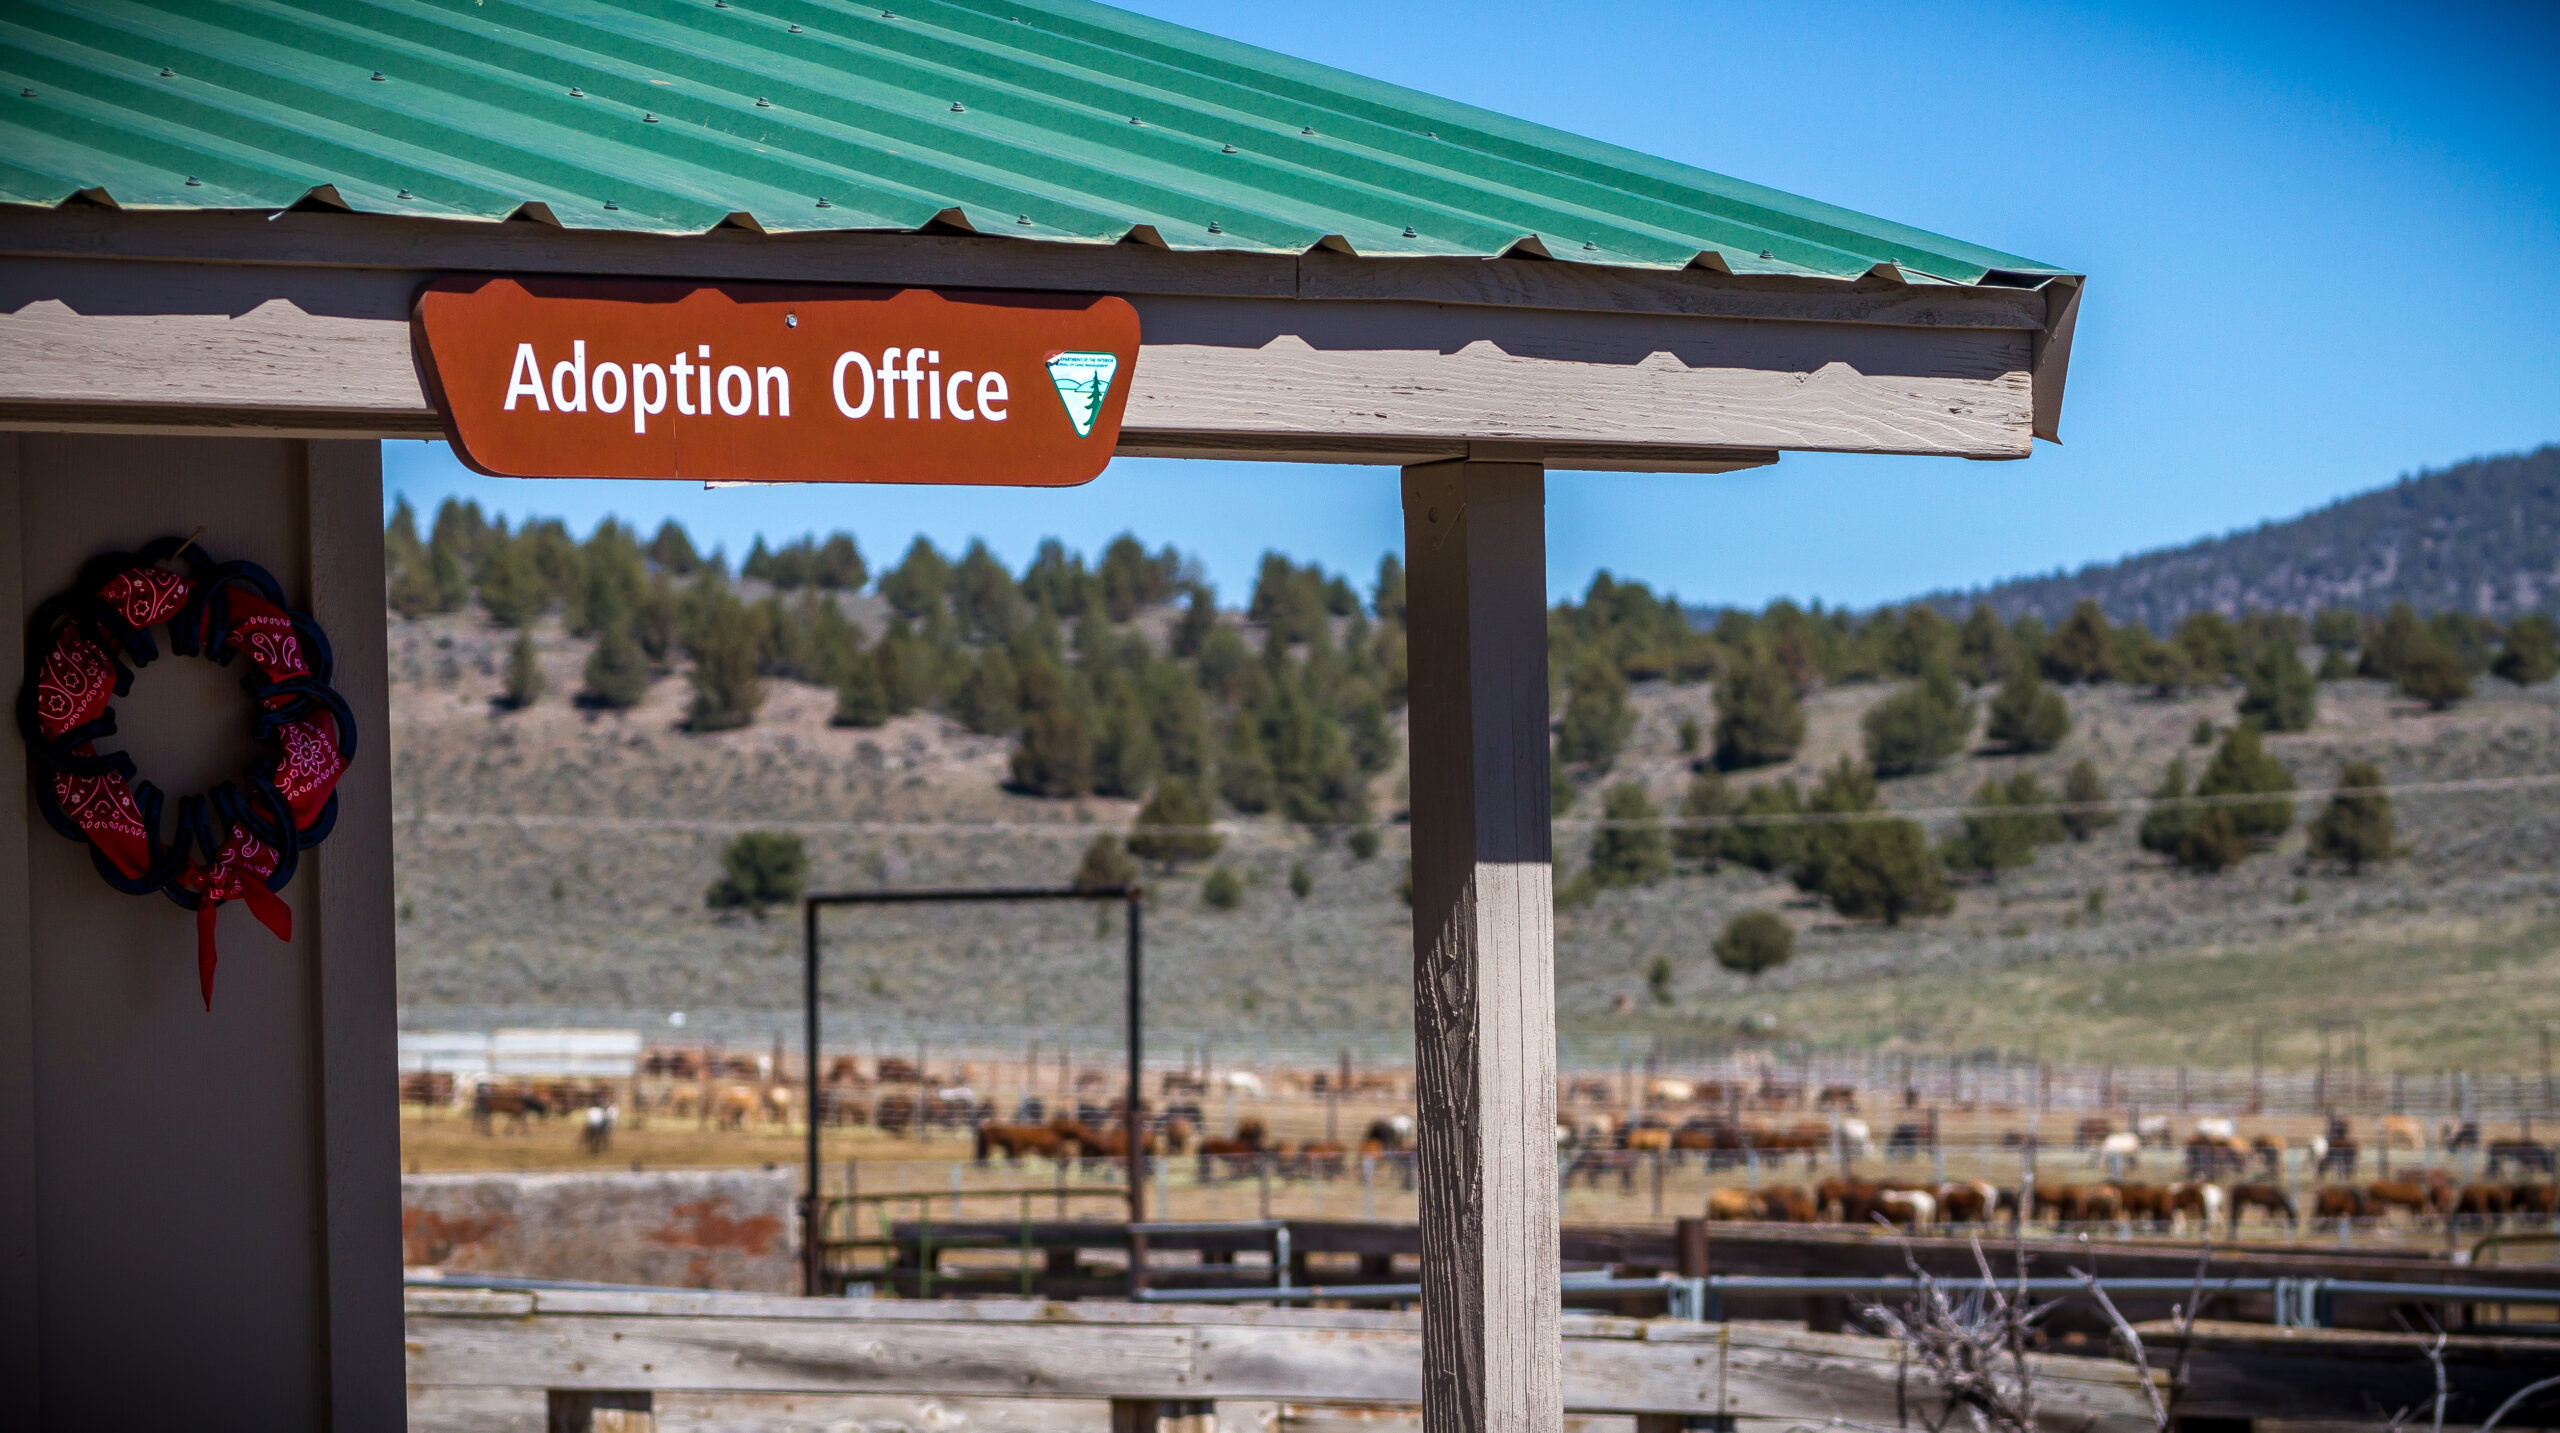 Adoption office in Hines Oregon where wild horses are kept.